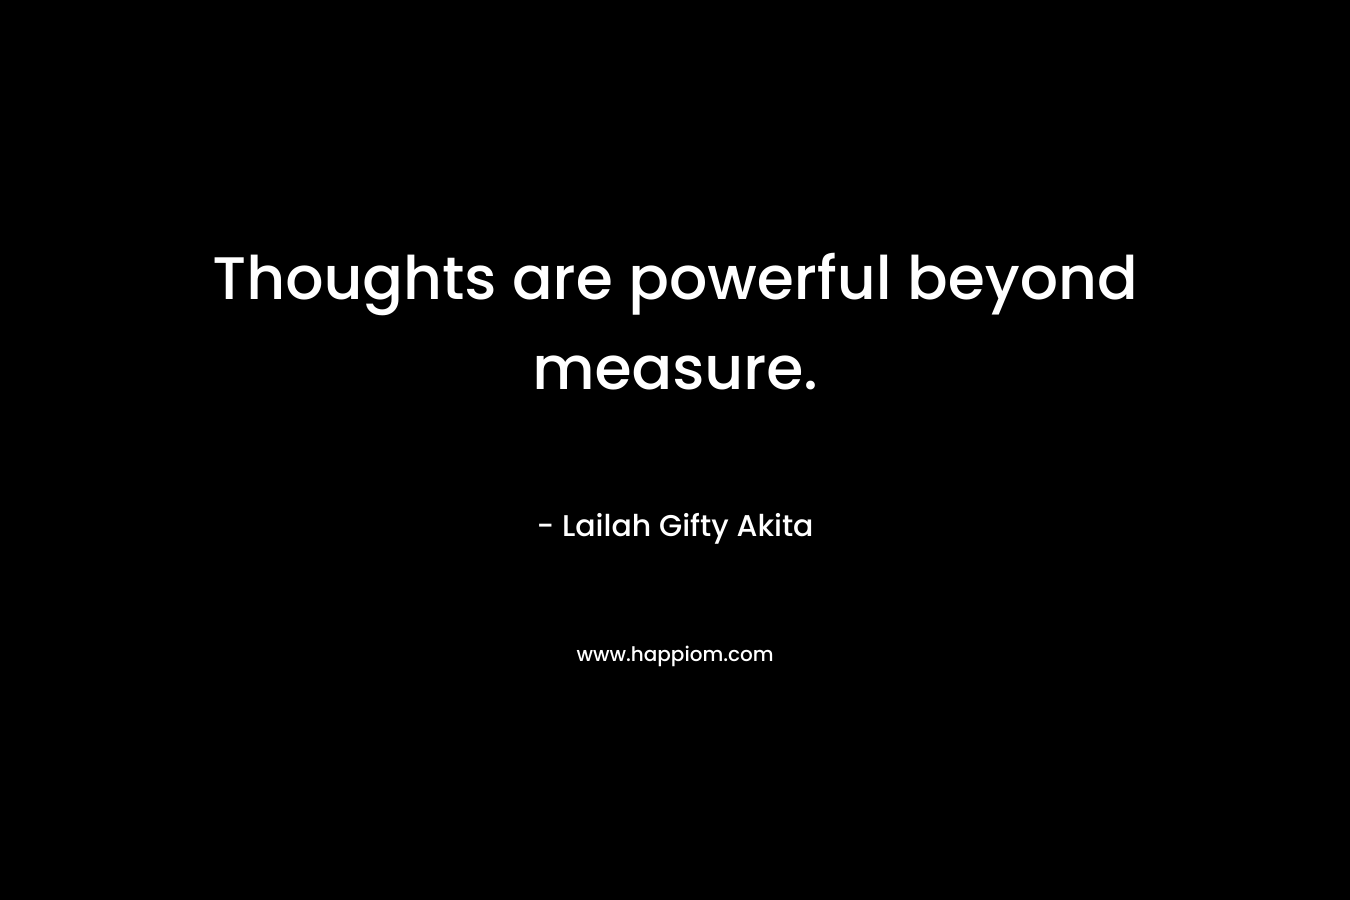 Thoughts are powerful beyond measure.